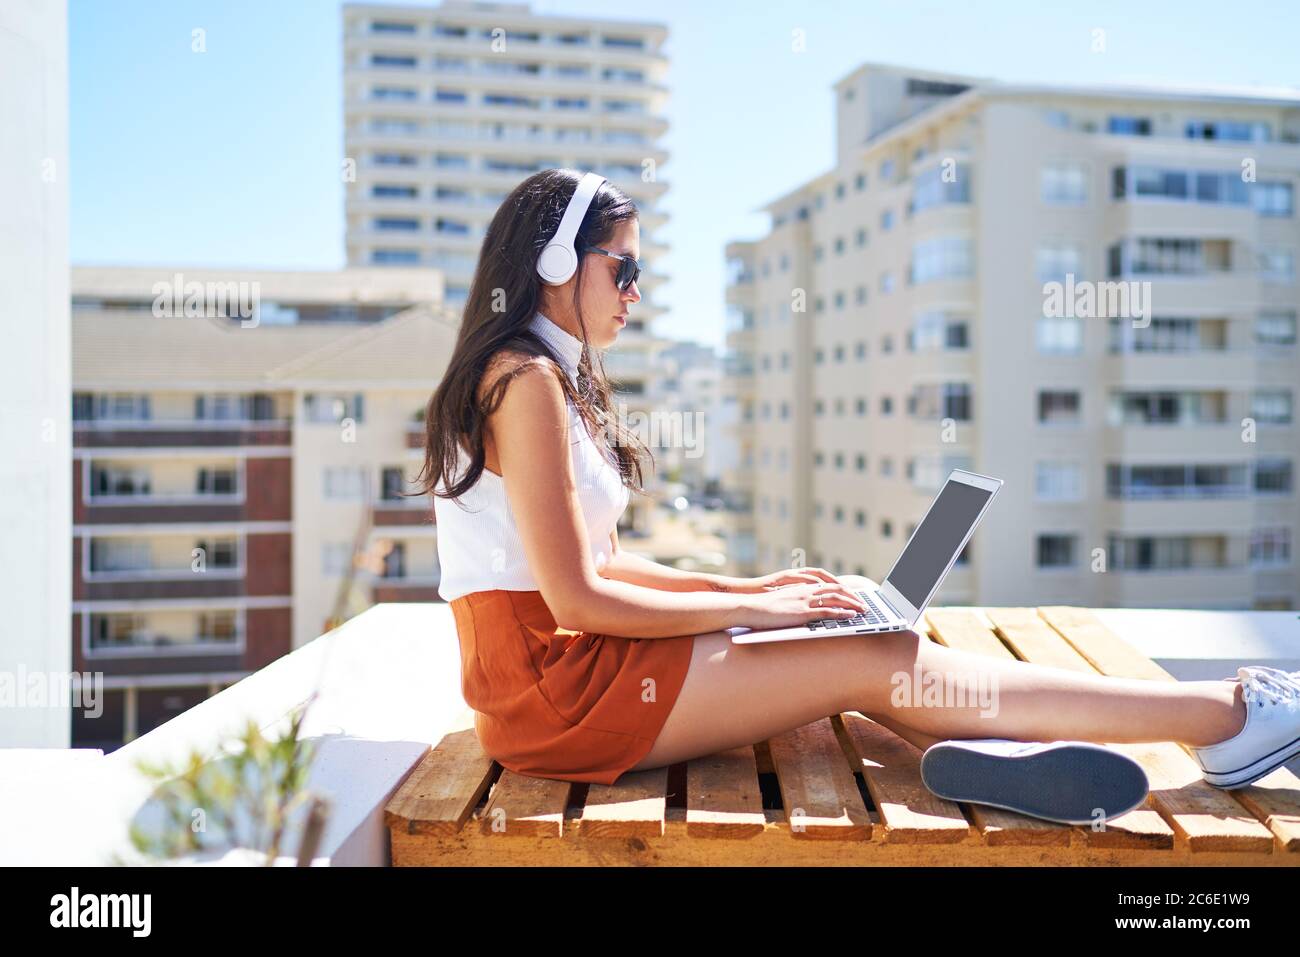 Young woman with headphones using laptop on sunny urban balcony Stock Photo